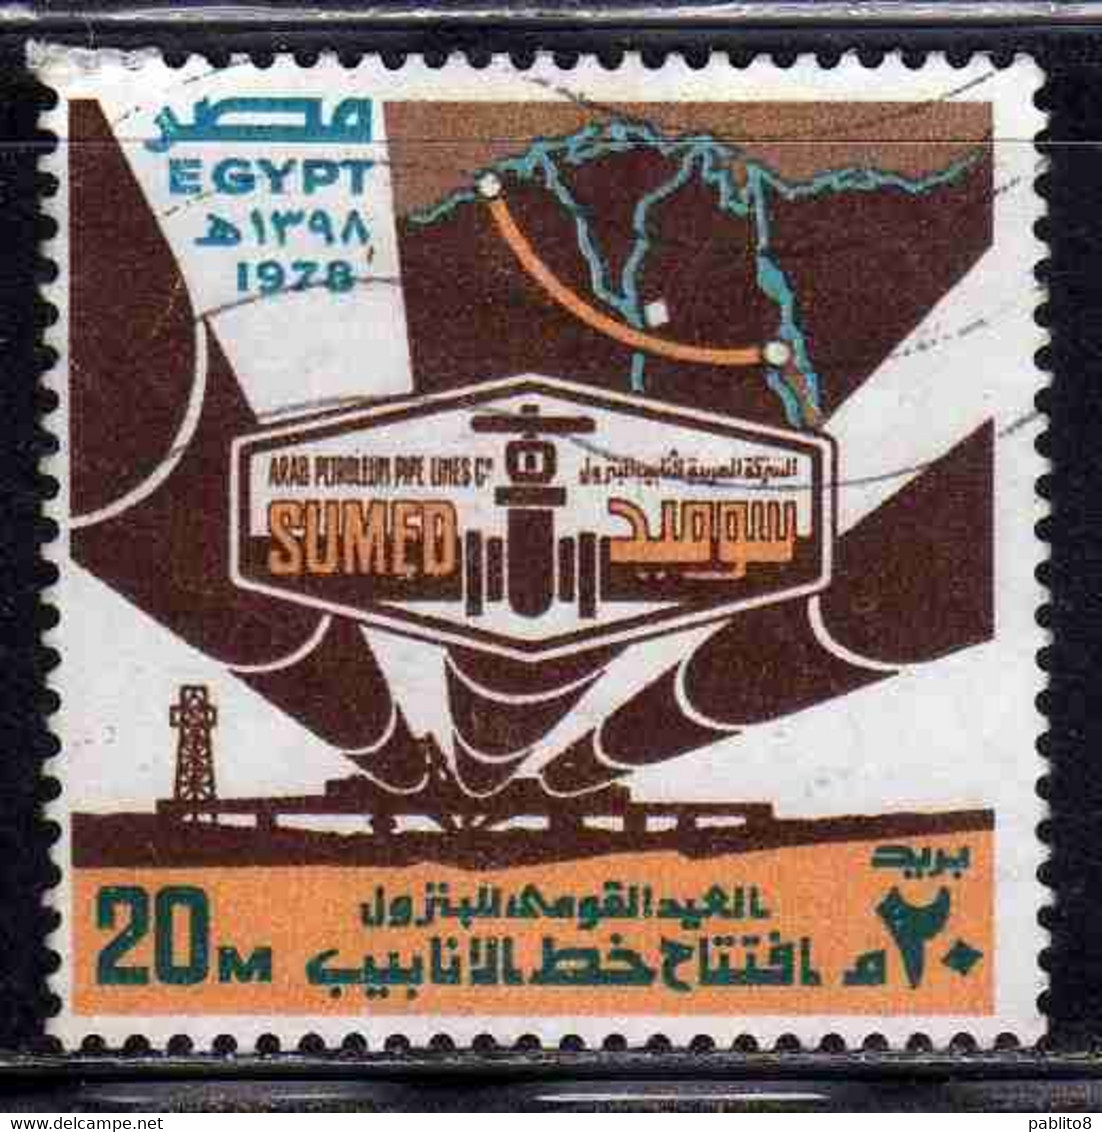 UAR EGYPT EGITTO 1978 INAUGURATION OF SUMED PIPELINE FROM SUEZ TO ALEXANDRIA 20m USED USATO OBLITERE' - Oblitérés